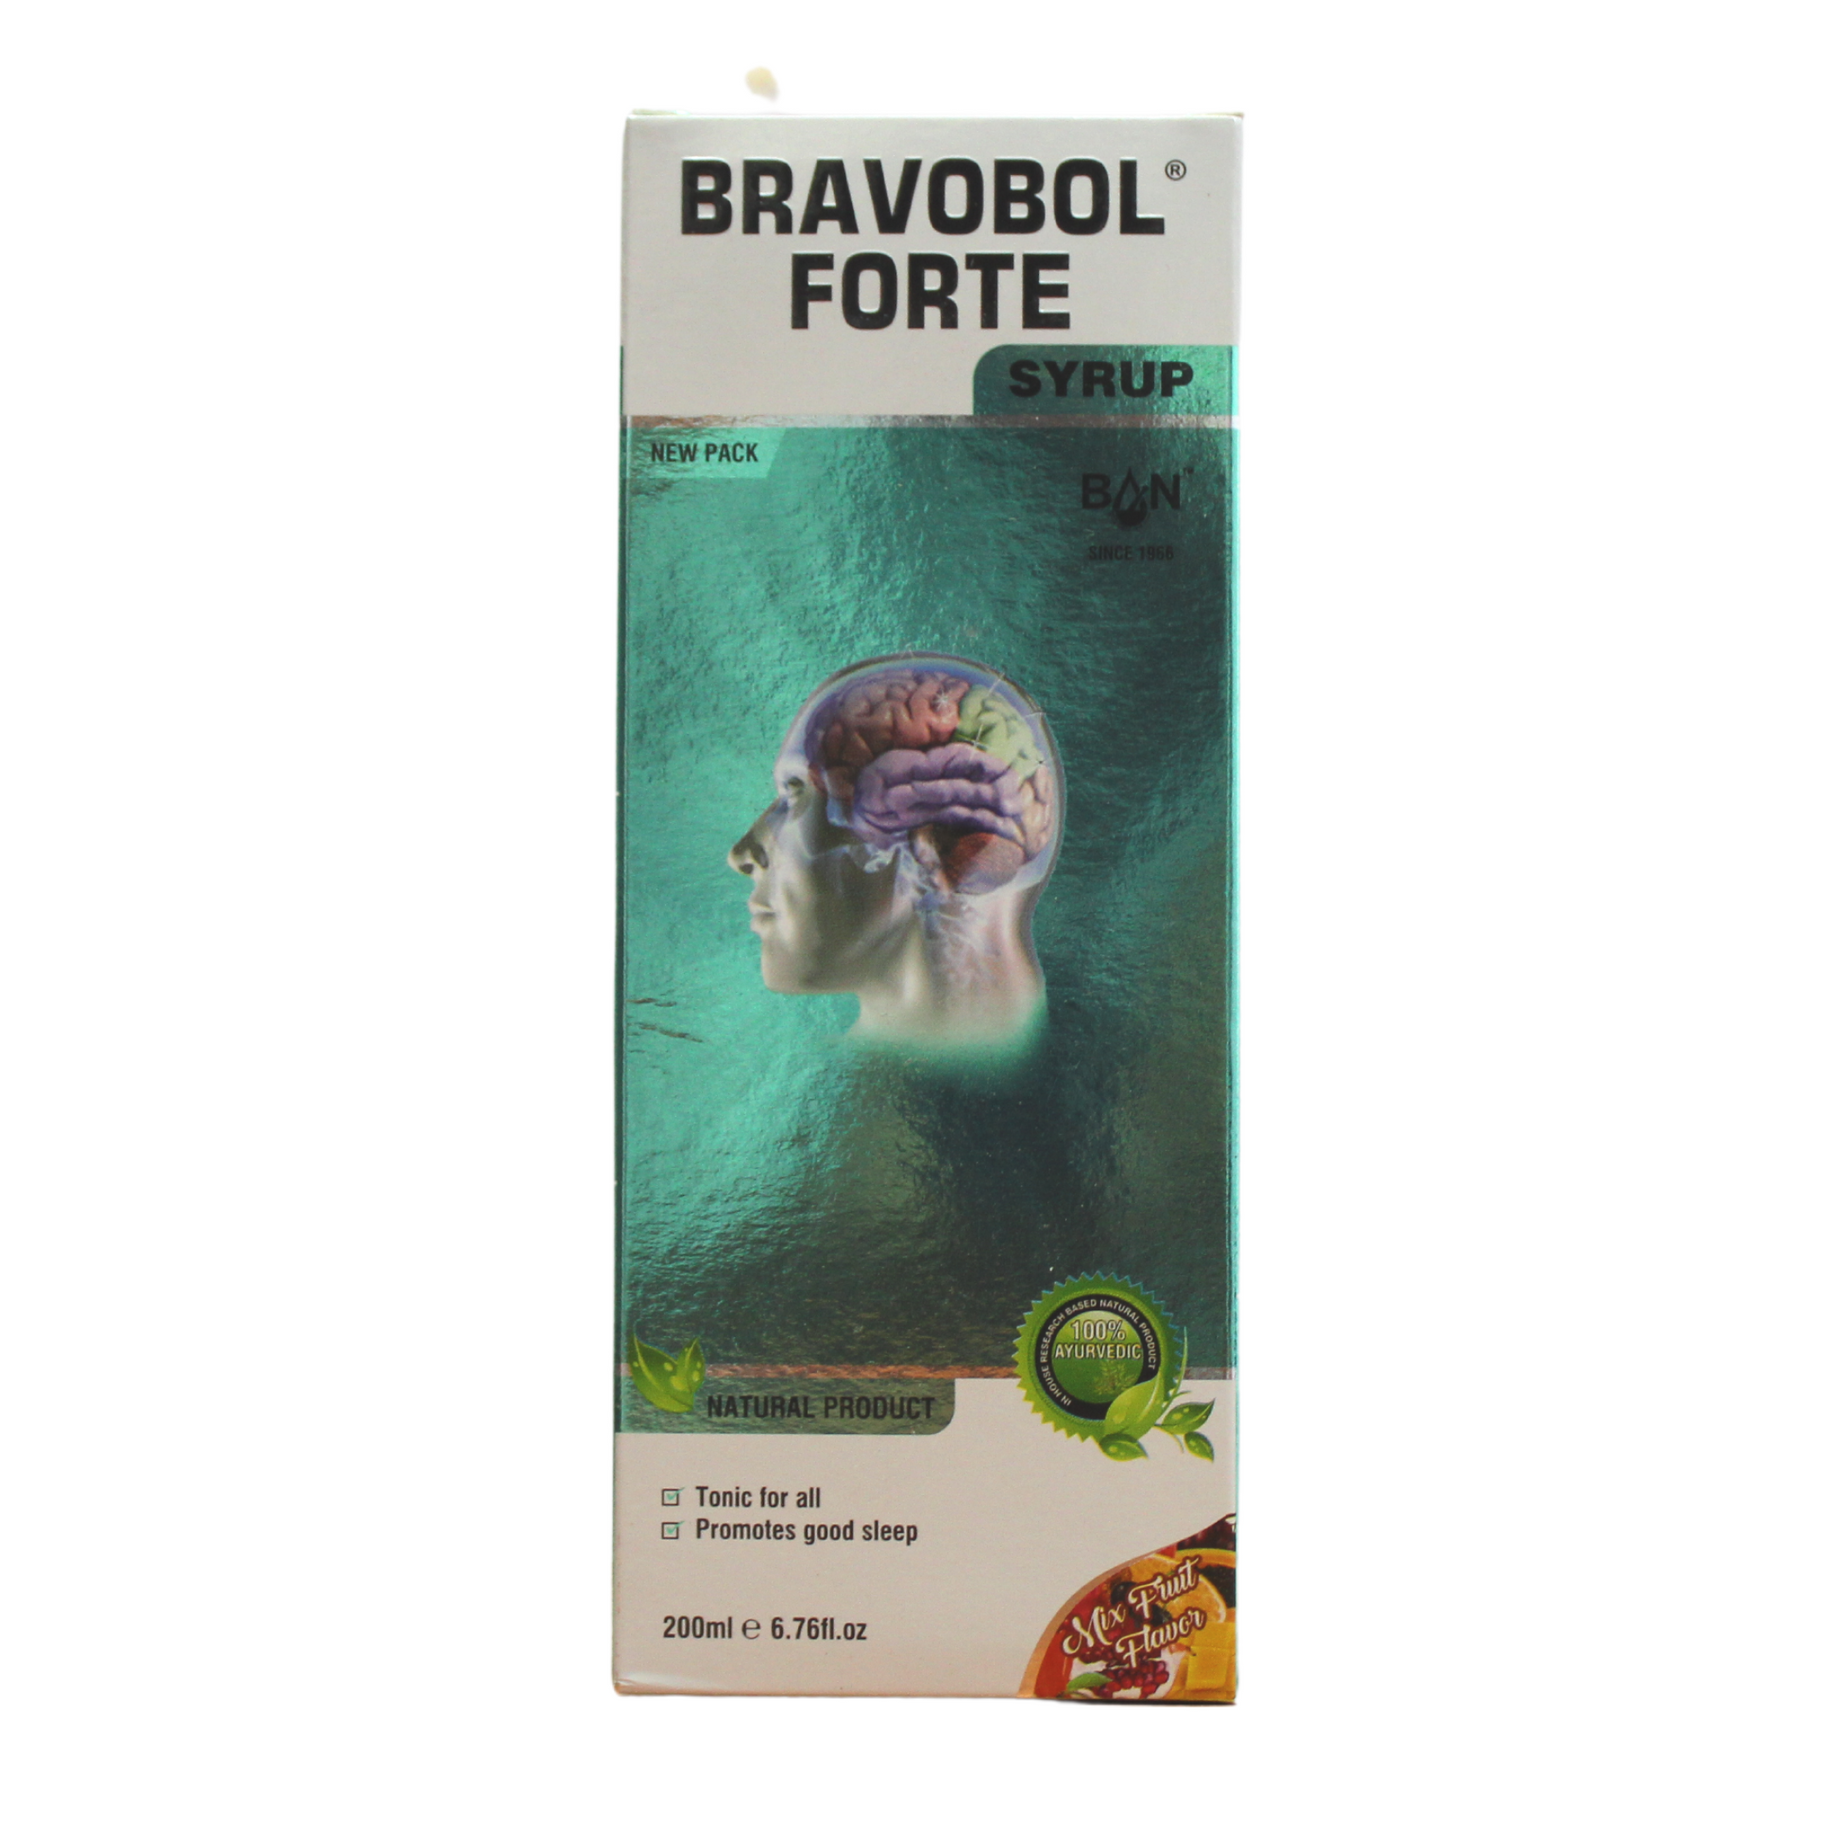 Shop Bravobol Forte Syrup - 200ml at price 130.00 from Banlabs Online - Ayush Care